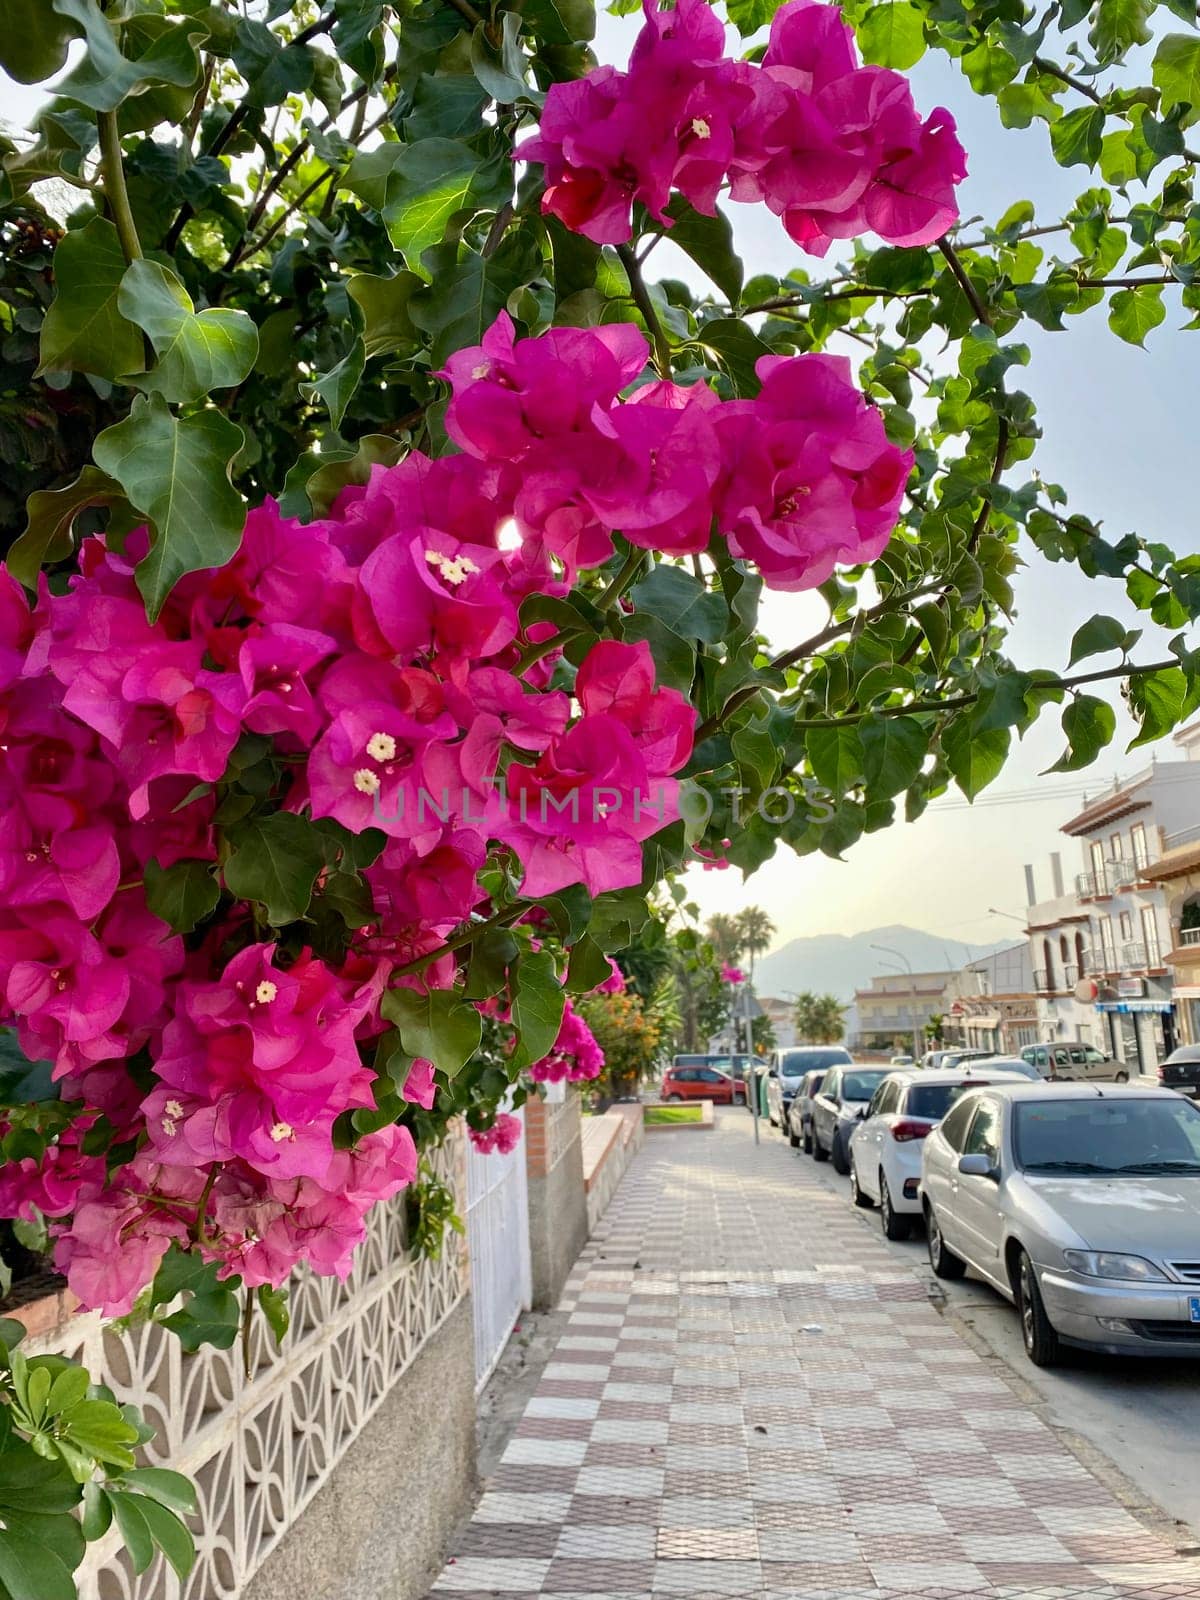 Blooming bougainvillea street town sidewall, traditional Greek flowers, pink floral wall by DailySF